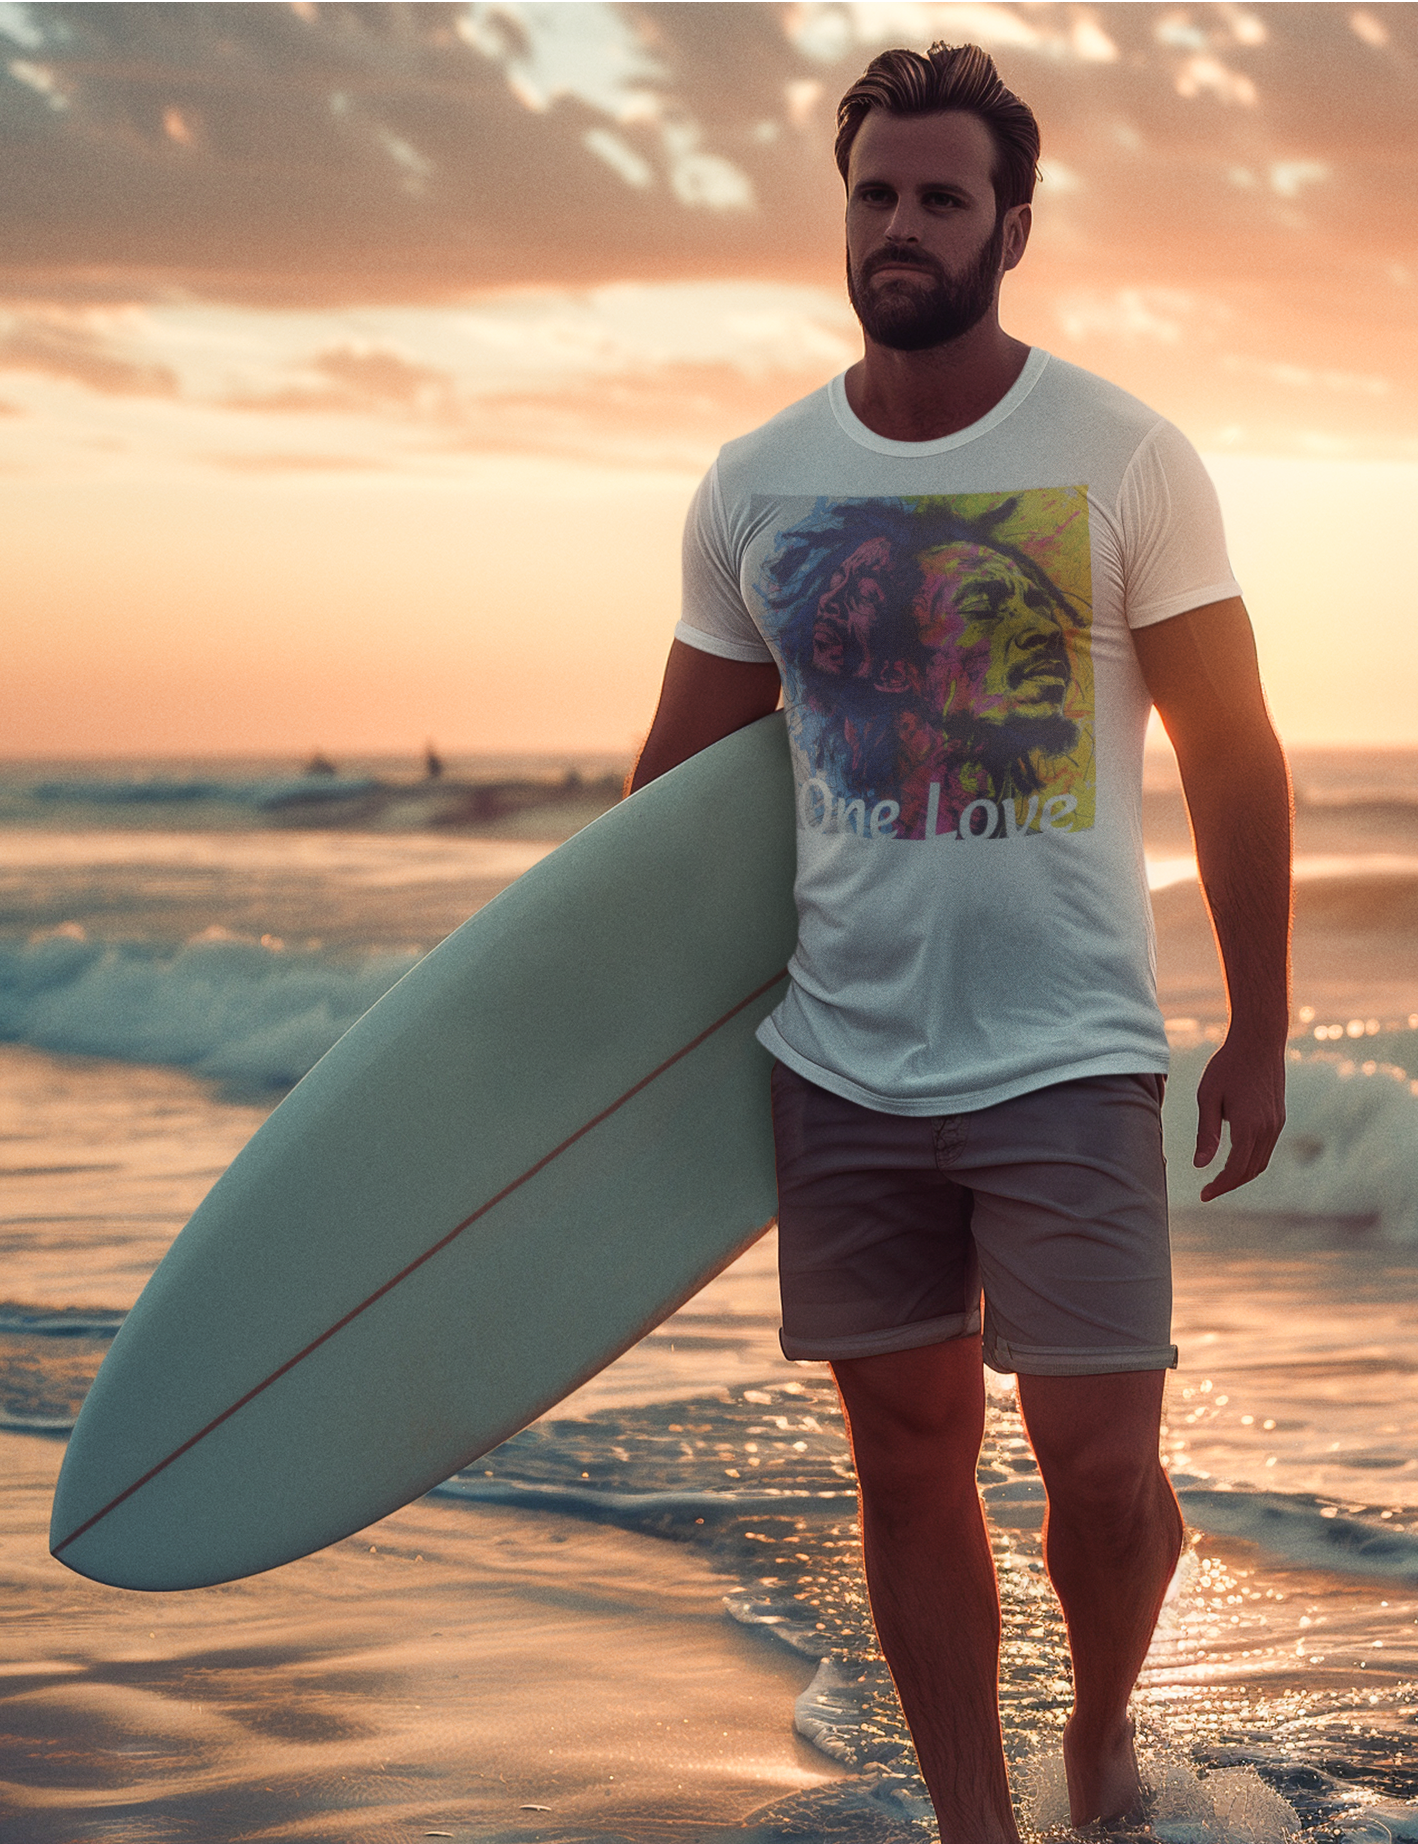 The image showcases a men's polyester tee adorned with a vivid, all-over print dedicated to Bob Marley. The design bursts with colors and symbolic references to Marley's artistry and message, all captured in high-quality fabric that highlights the tee's comfort and visual appeal